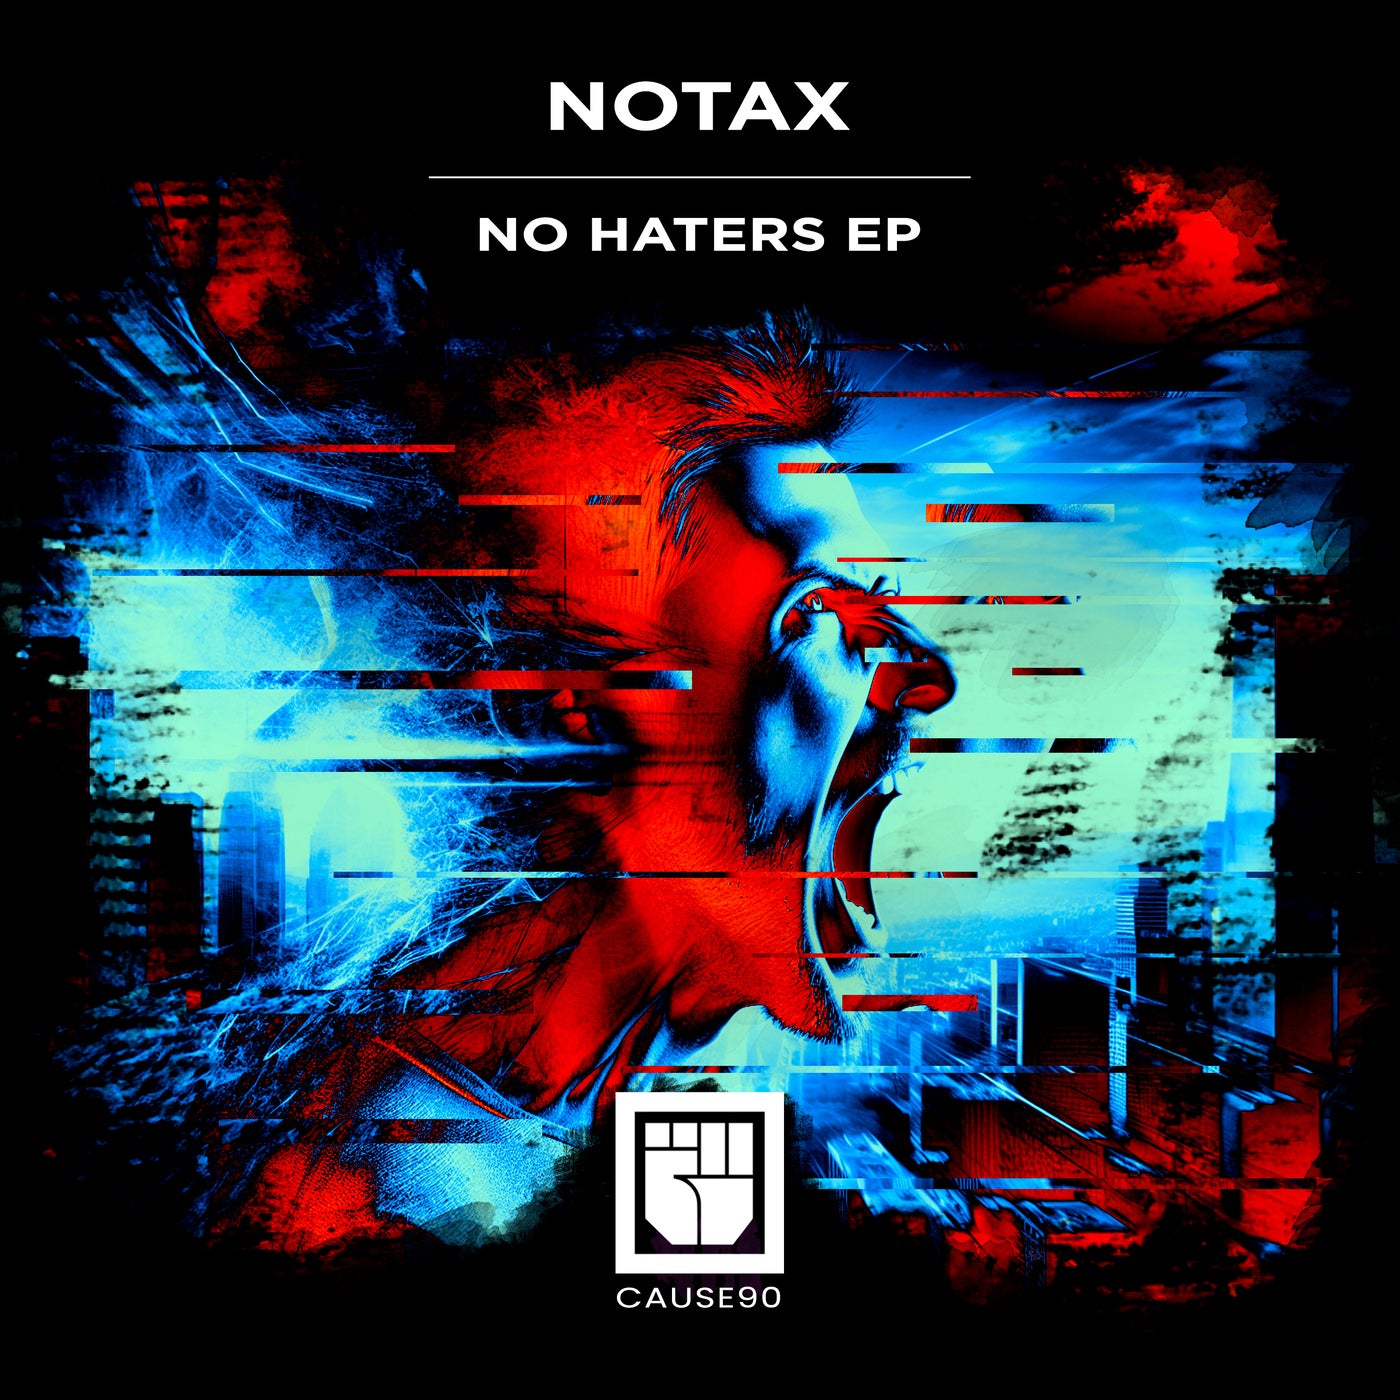 No Haters EP